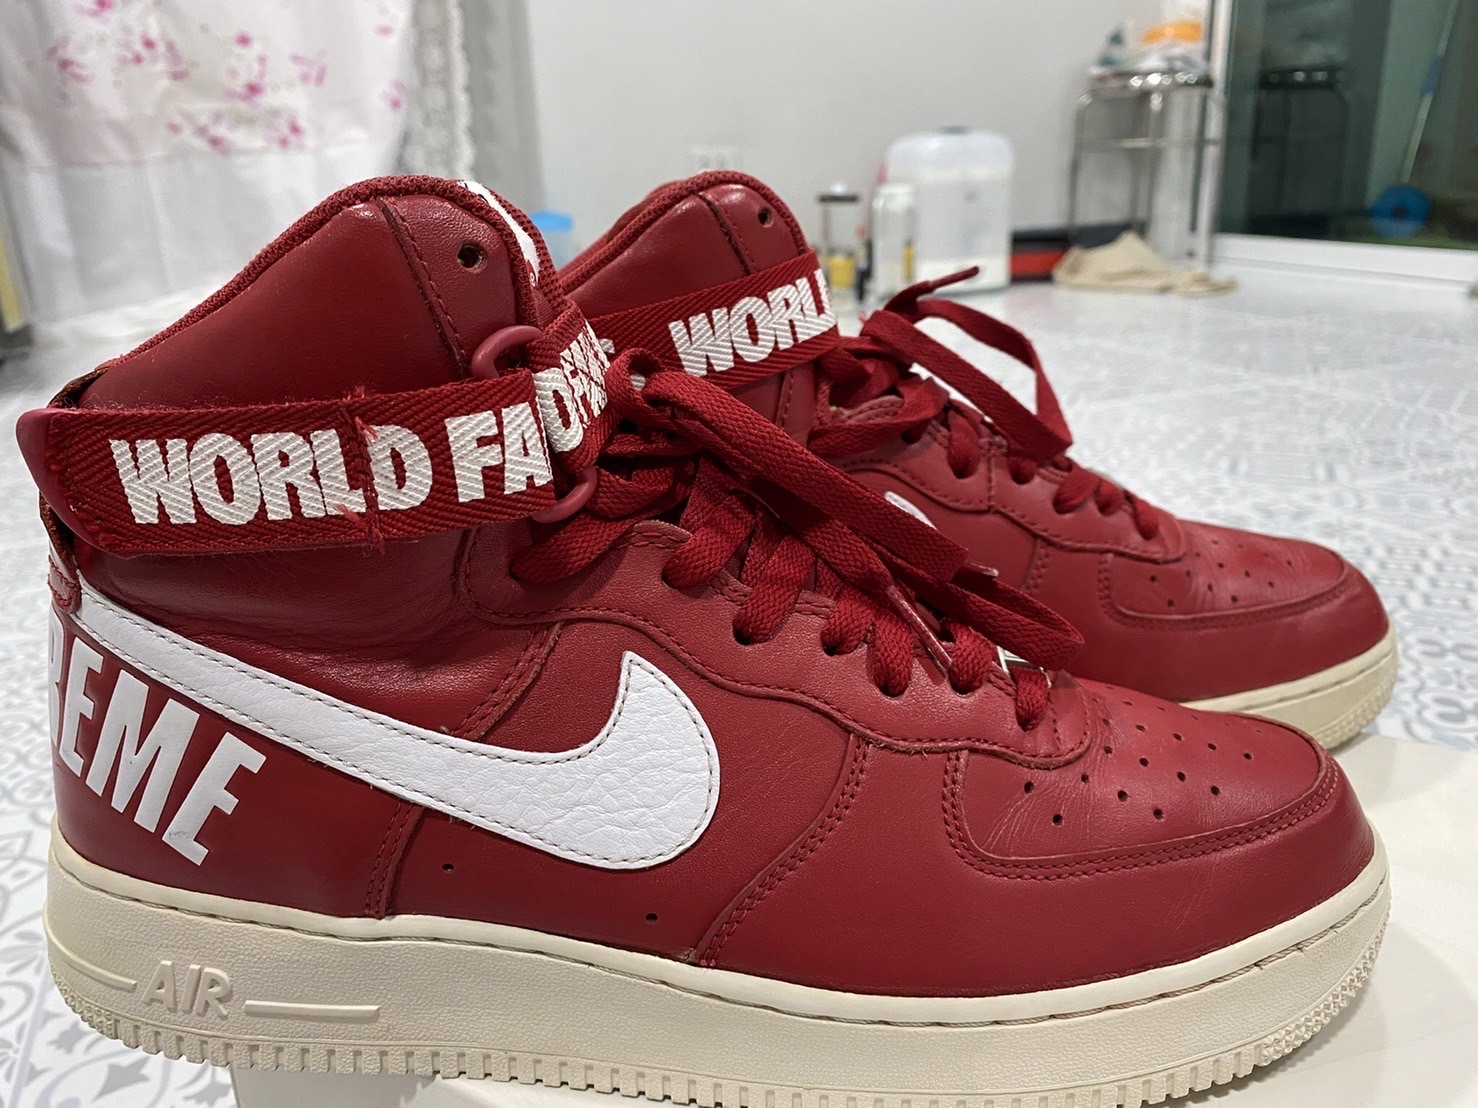 Nike Air Force 1 High Supreme World Famous Shoes 698696-610 Mens Size 12 Red